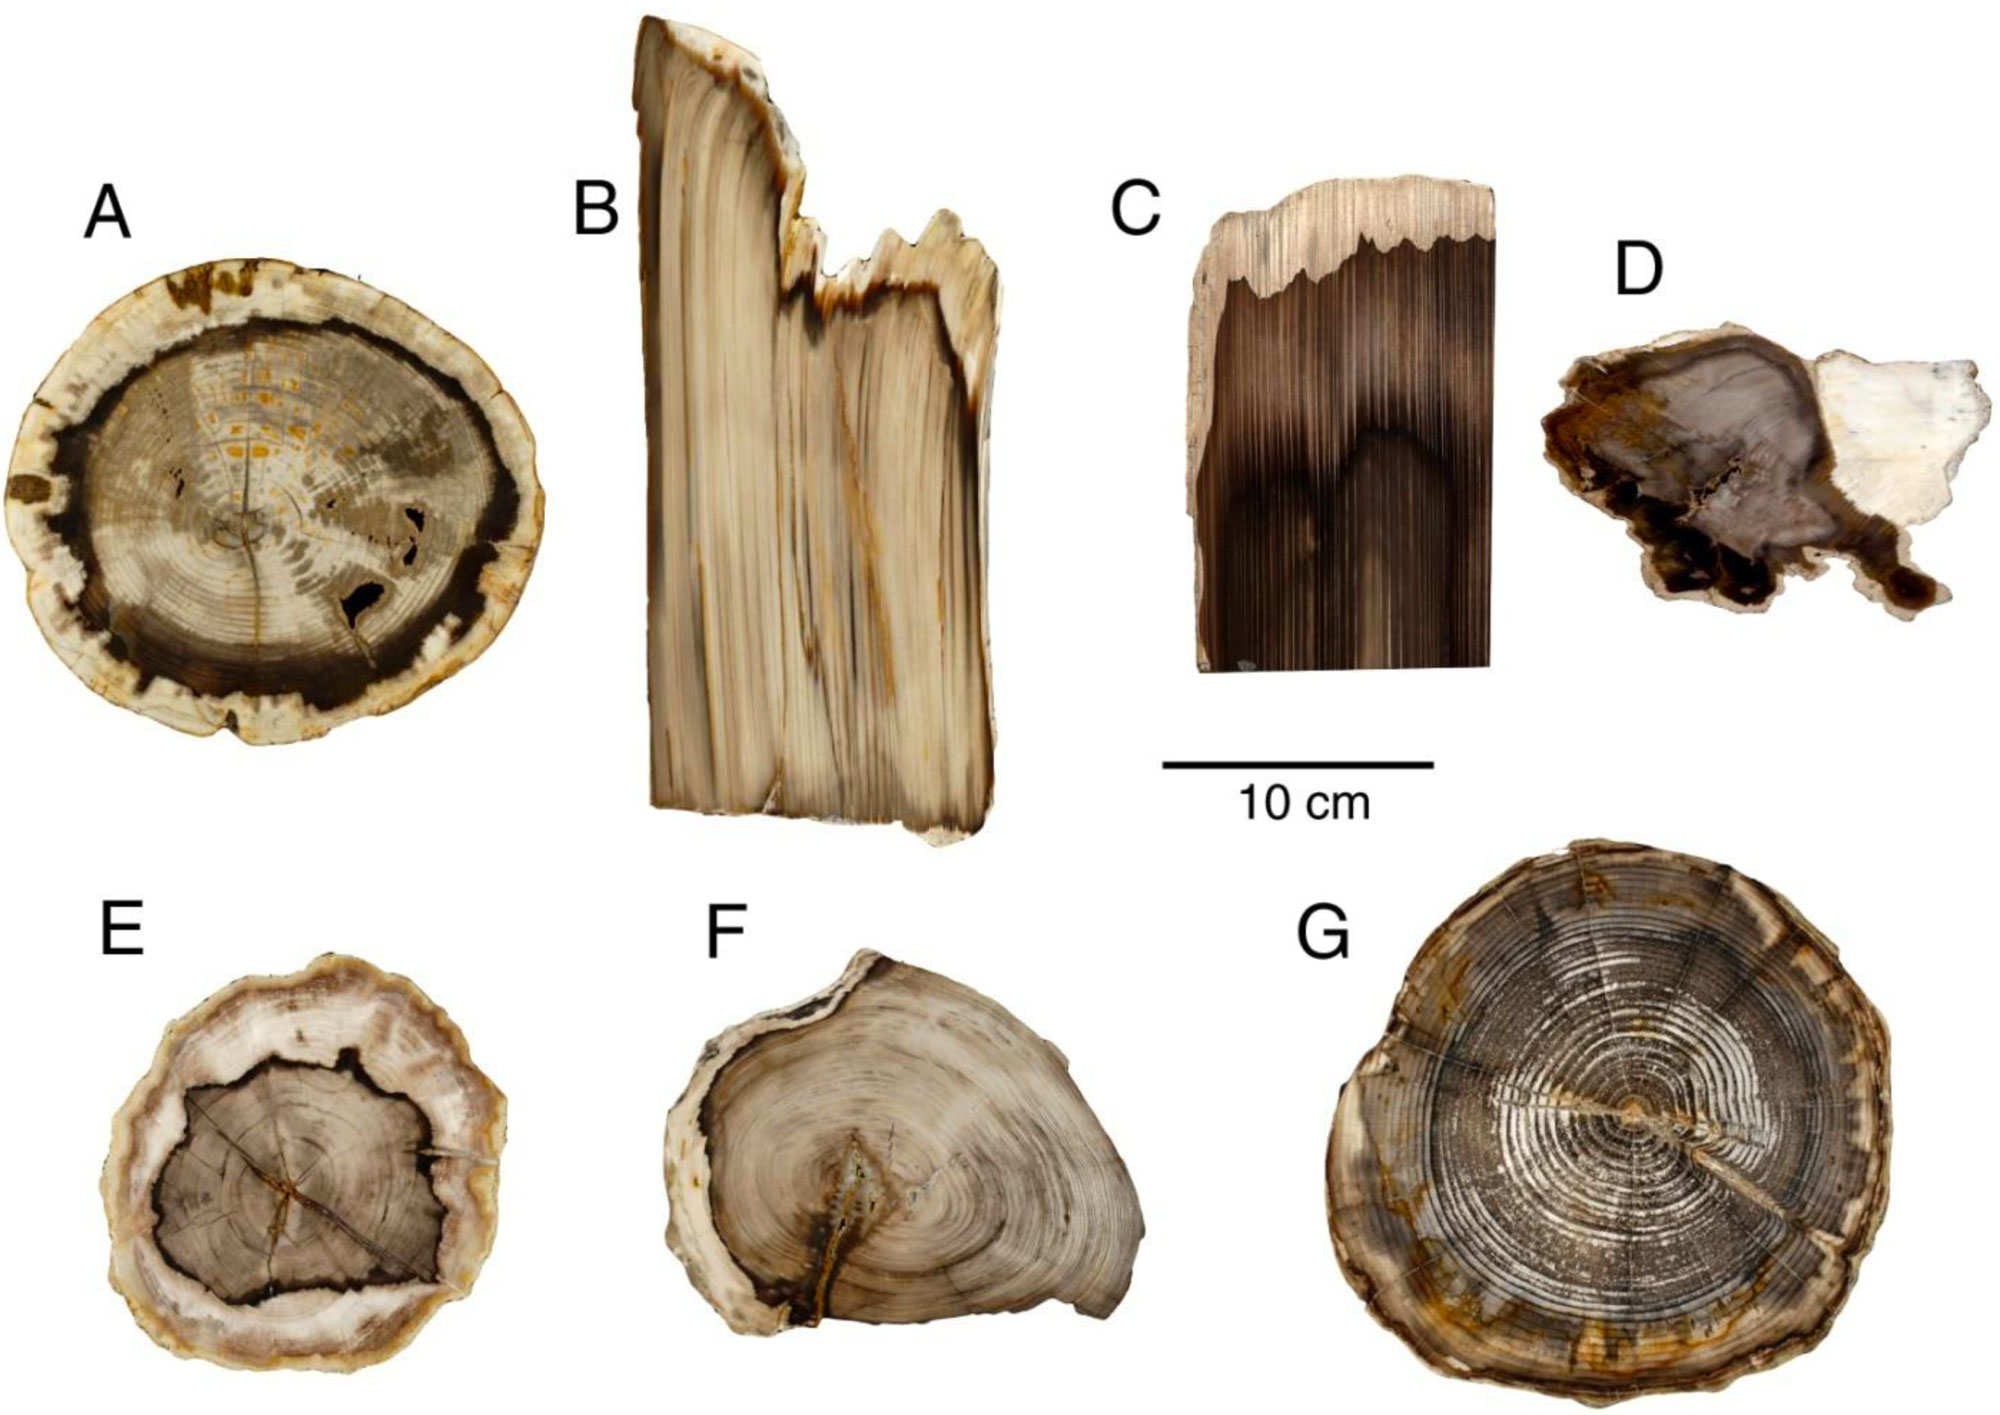 Figure with photograph of six petrified wood specimens from the middle Miocene of Washington. Four specimens are shown in cross section, one is shown in long section, and one is shown in both cross and long section. The woods are a mix of conifers and angiosperms (flowering plants).